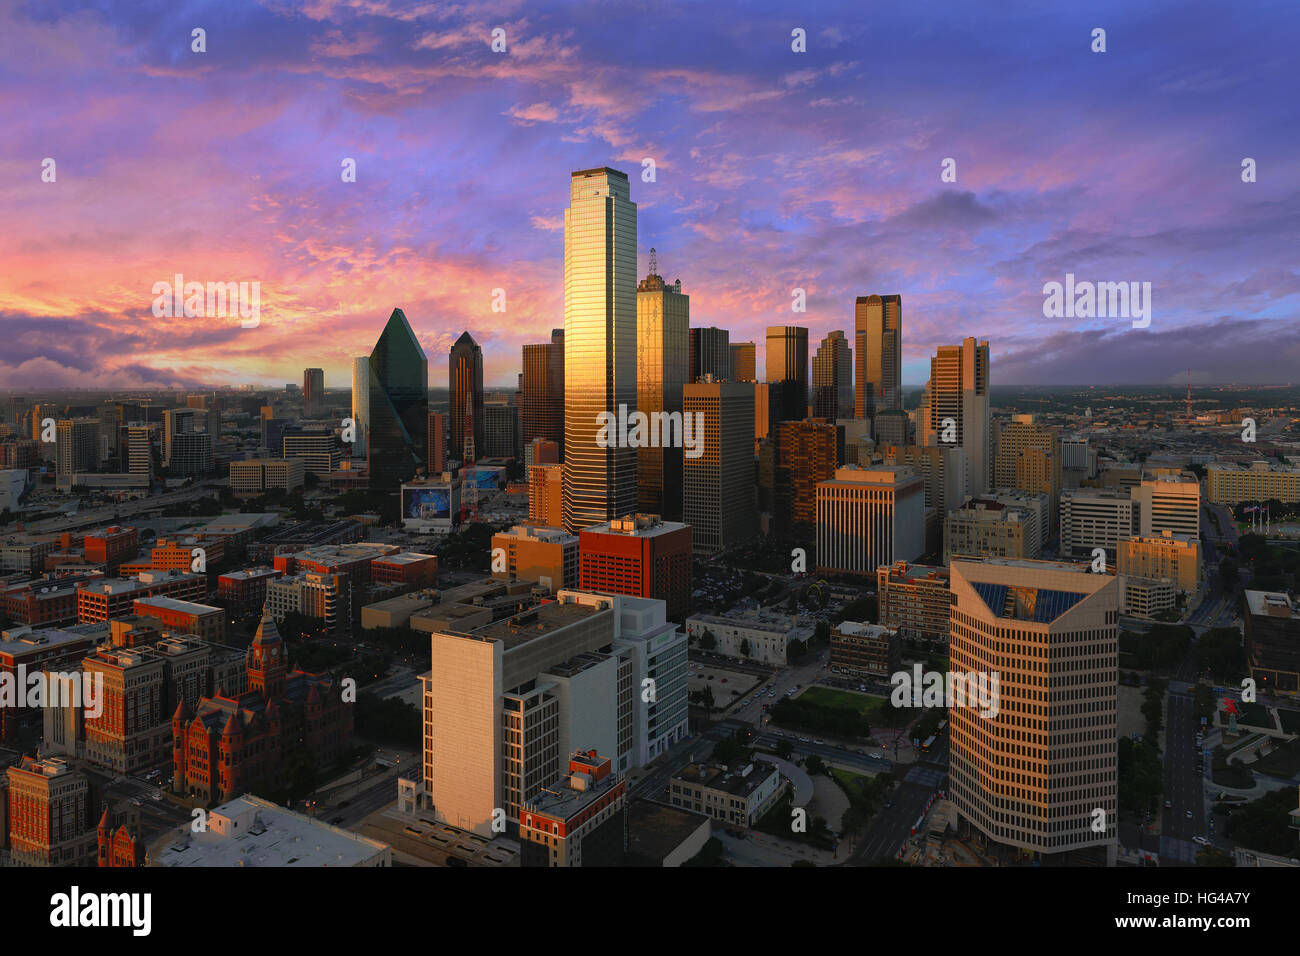 Dallas City Skyline at dusk, sunset. Dallas Texas downtown, business center. Commercial zone in big city. Dallas City view from Reunion Tower. Stock Photo